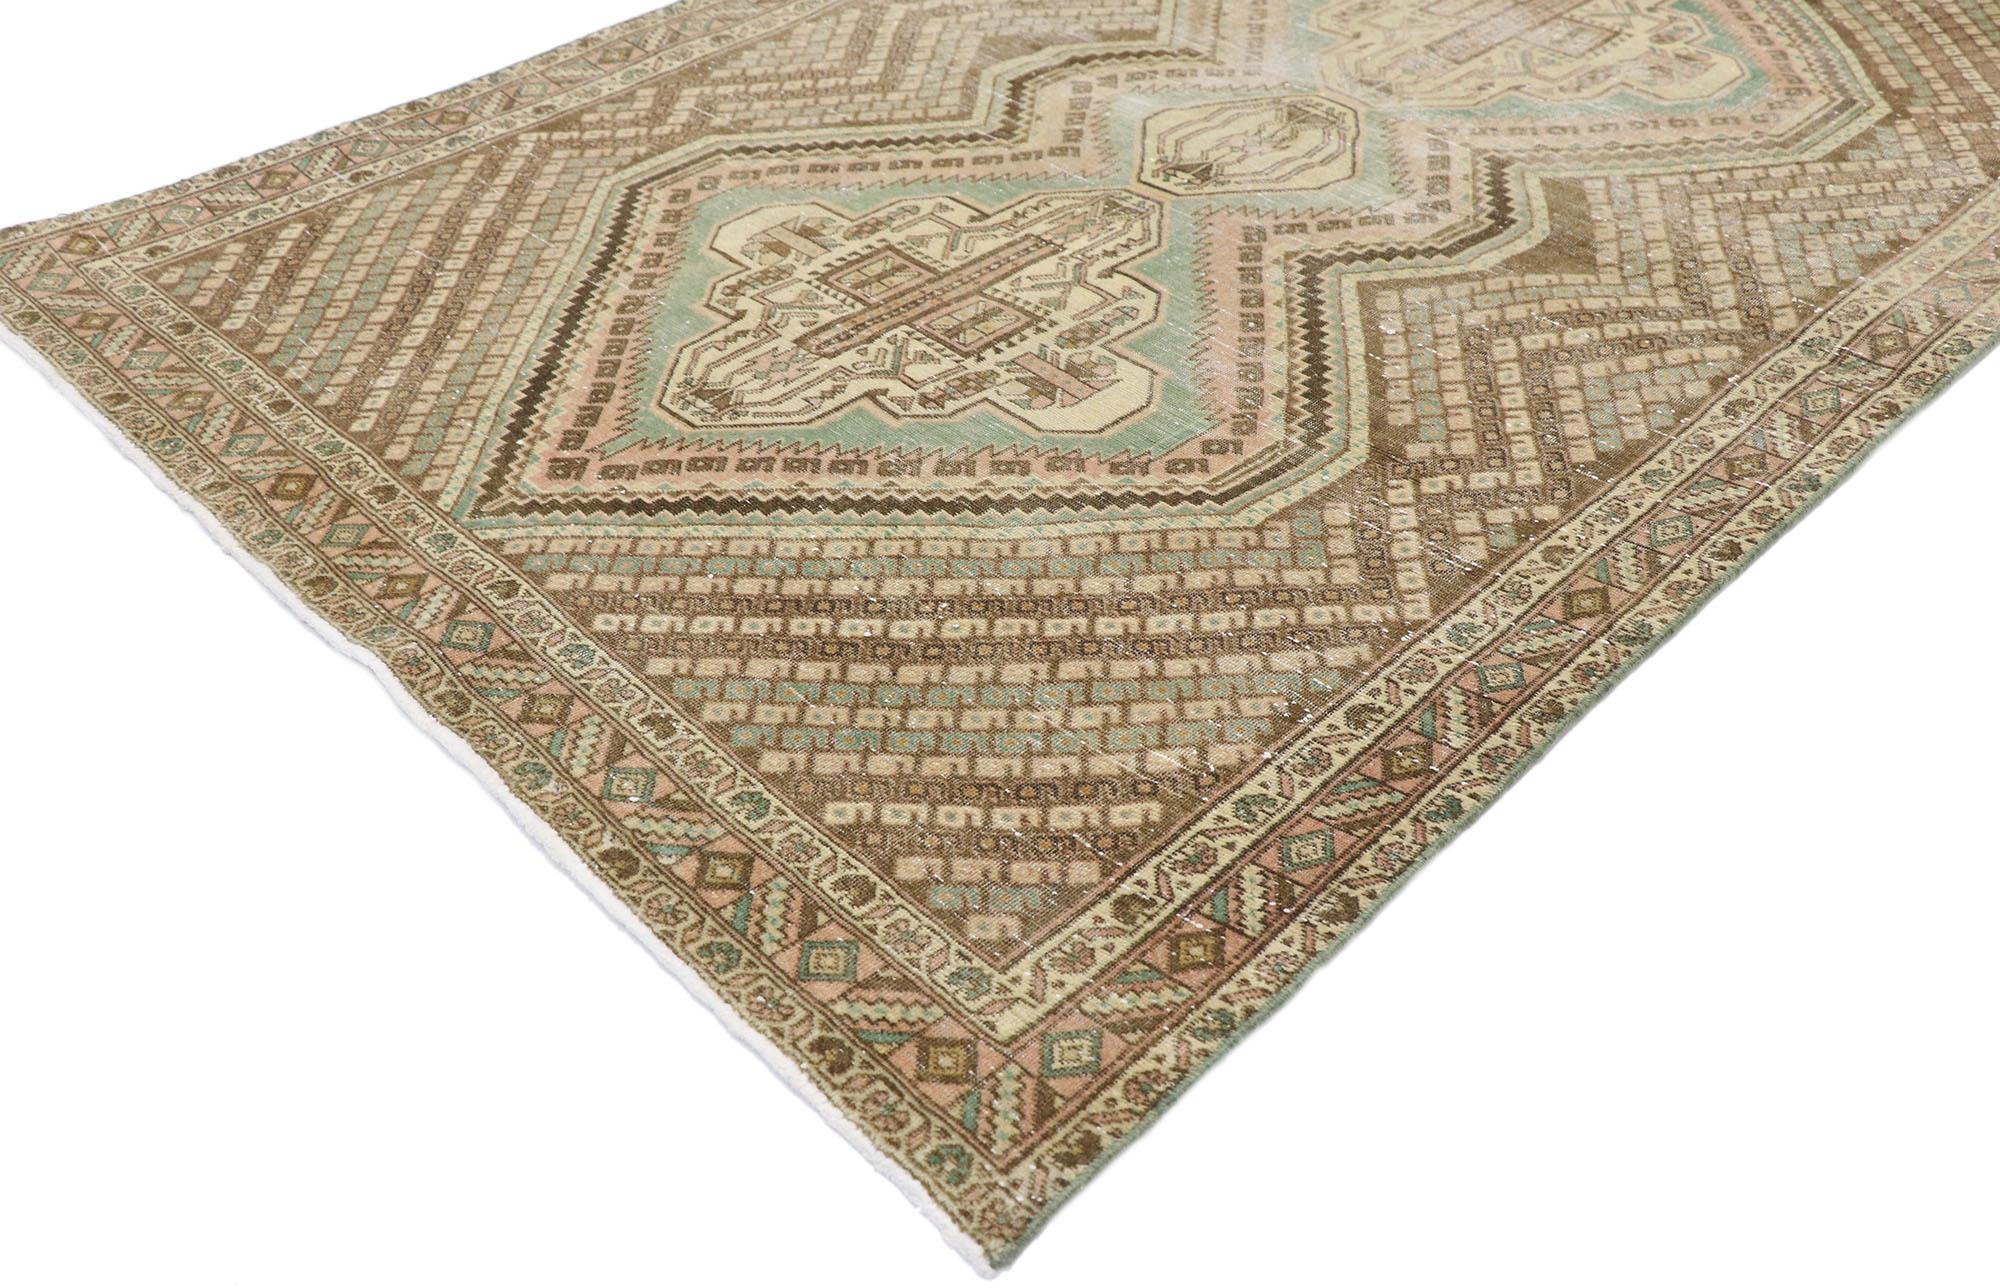 60852 Distressed antique Persian Afshar Tribal rug with Boteh Design. Blending nomadic village charm and Folk Art warmth with ancient symbolism, this hand-knotted wool distressed antique Persian Afshar rug beautifully showcases trial style in